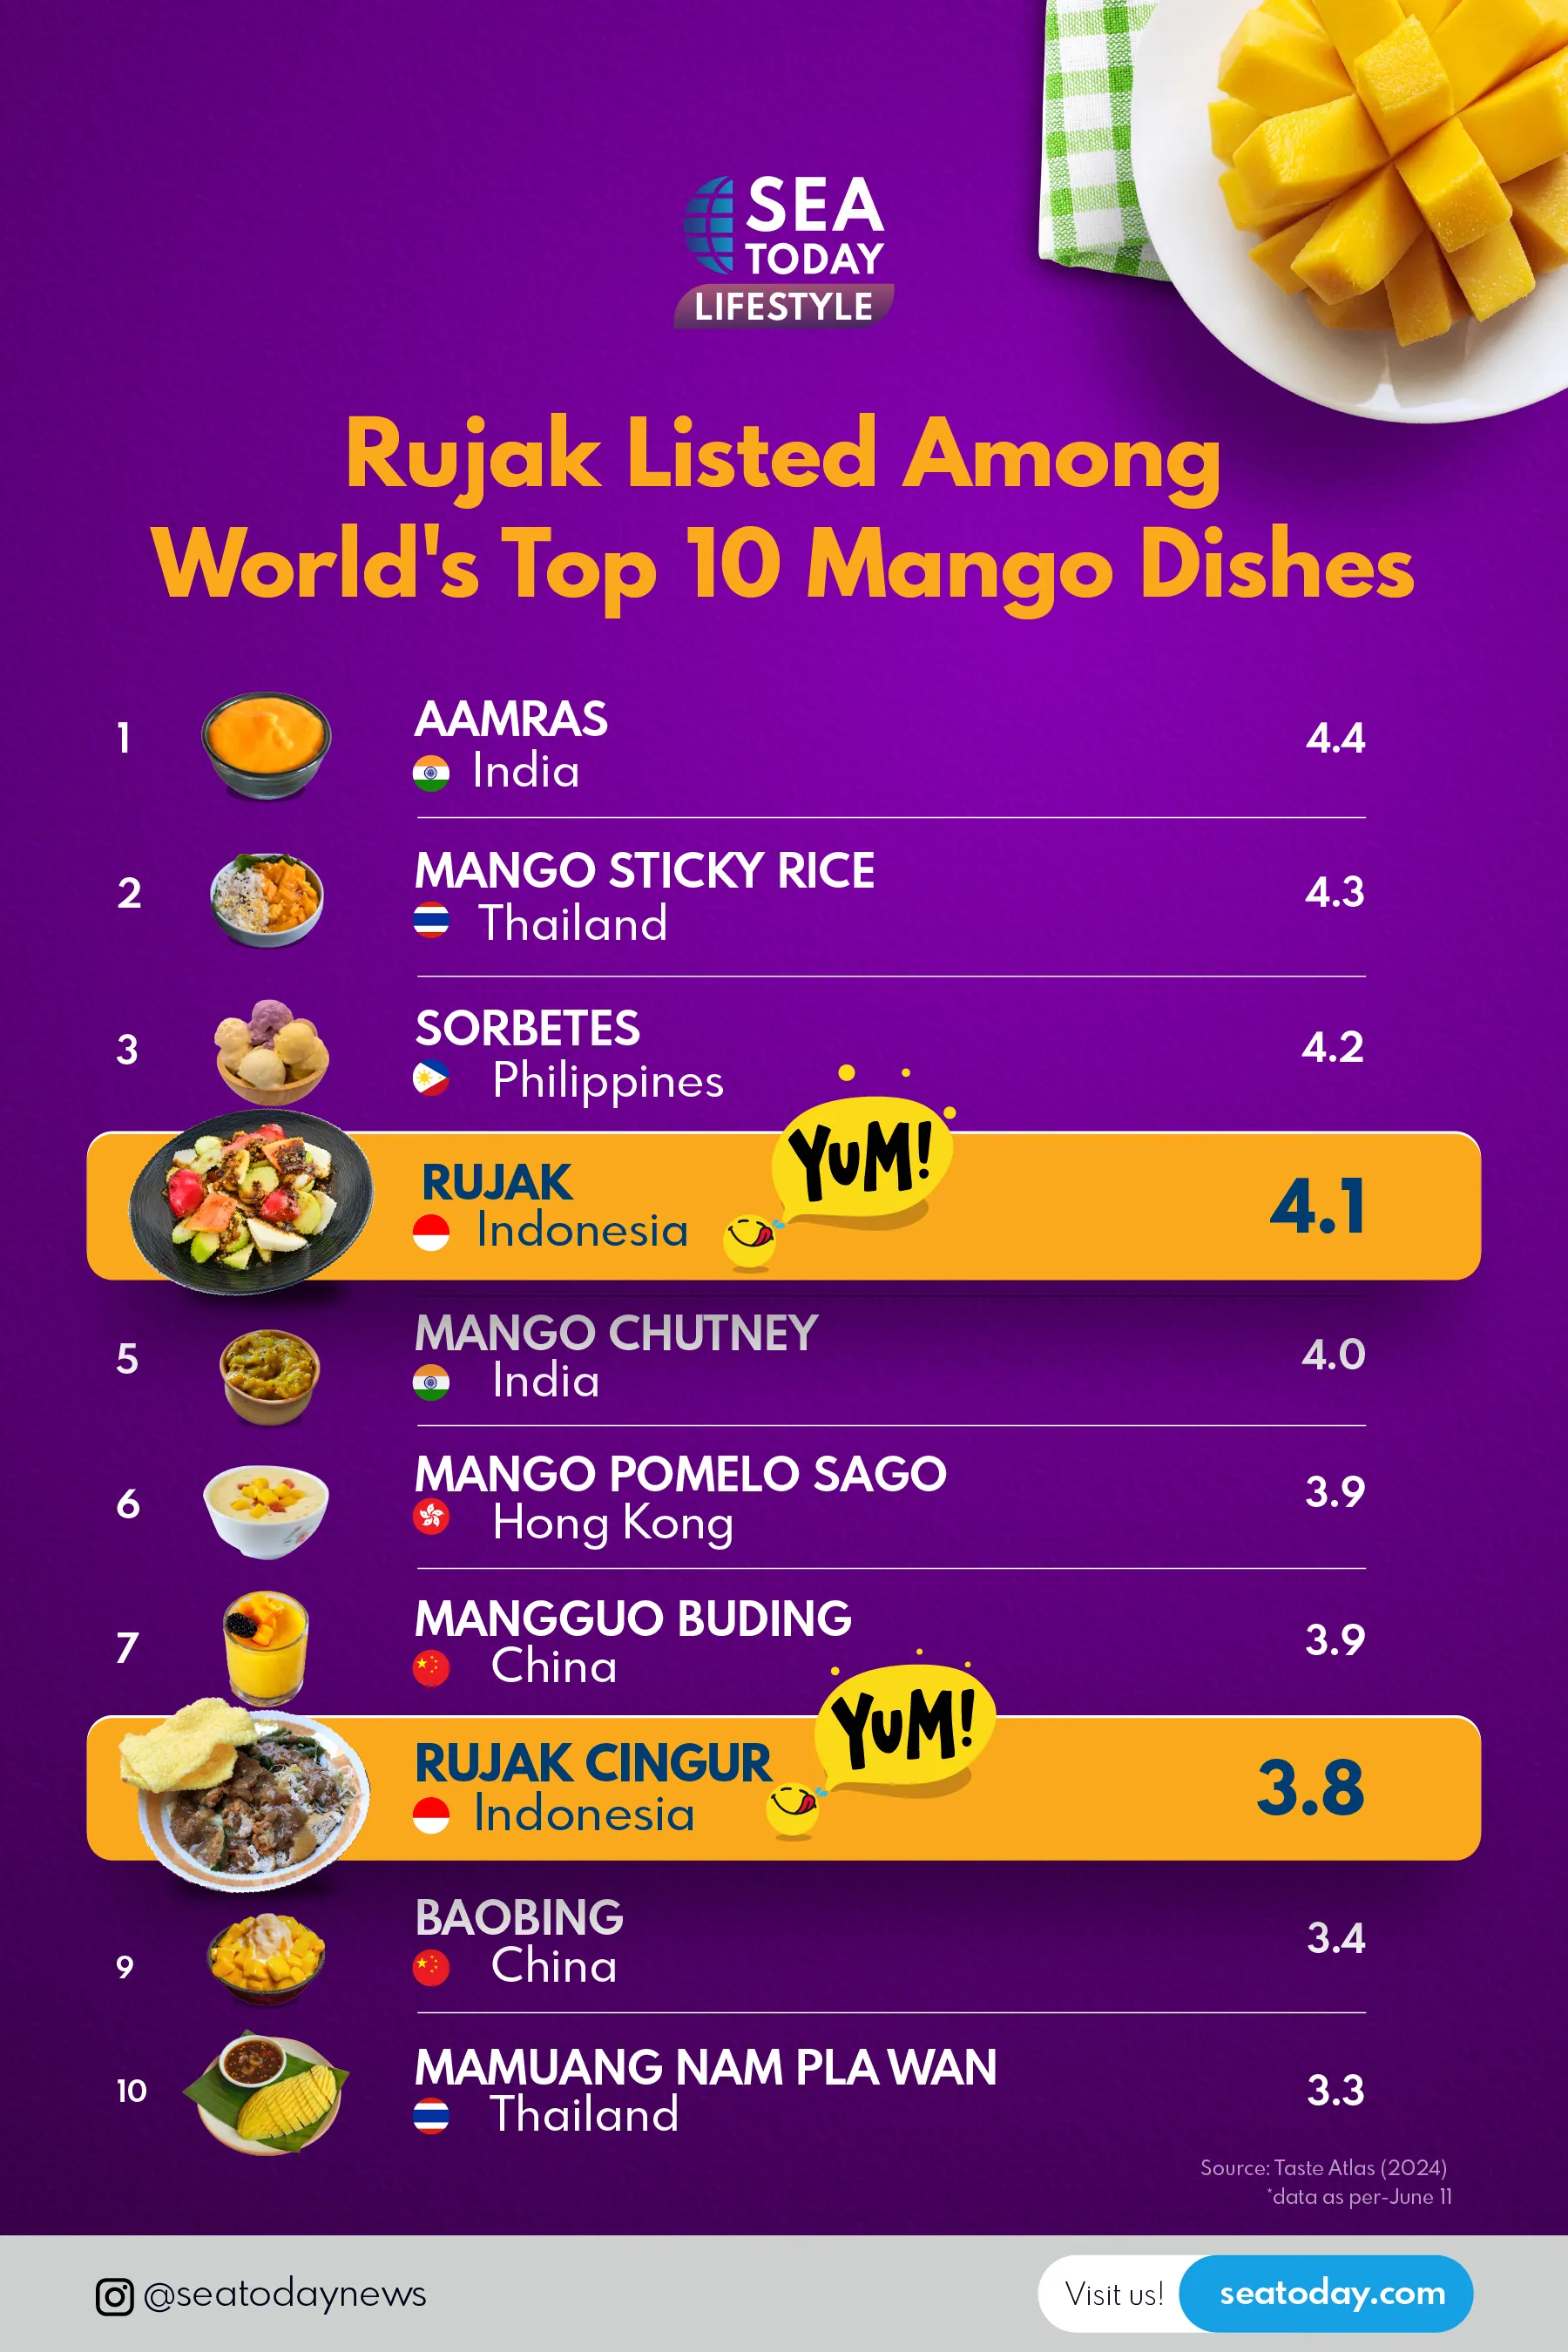 Rujak Listed Among World's Top 10 Mango Dishes